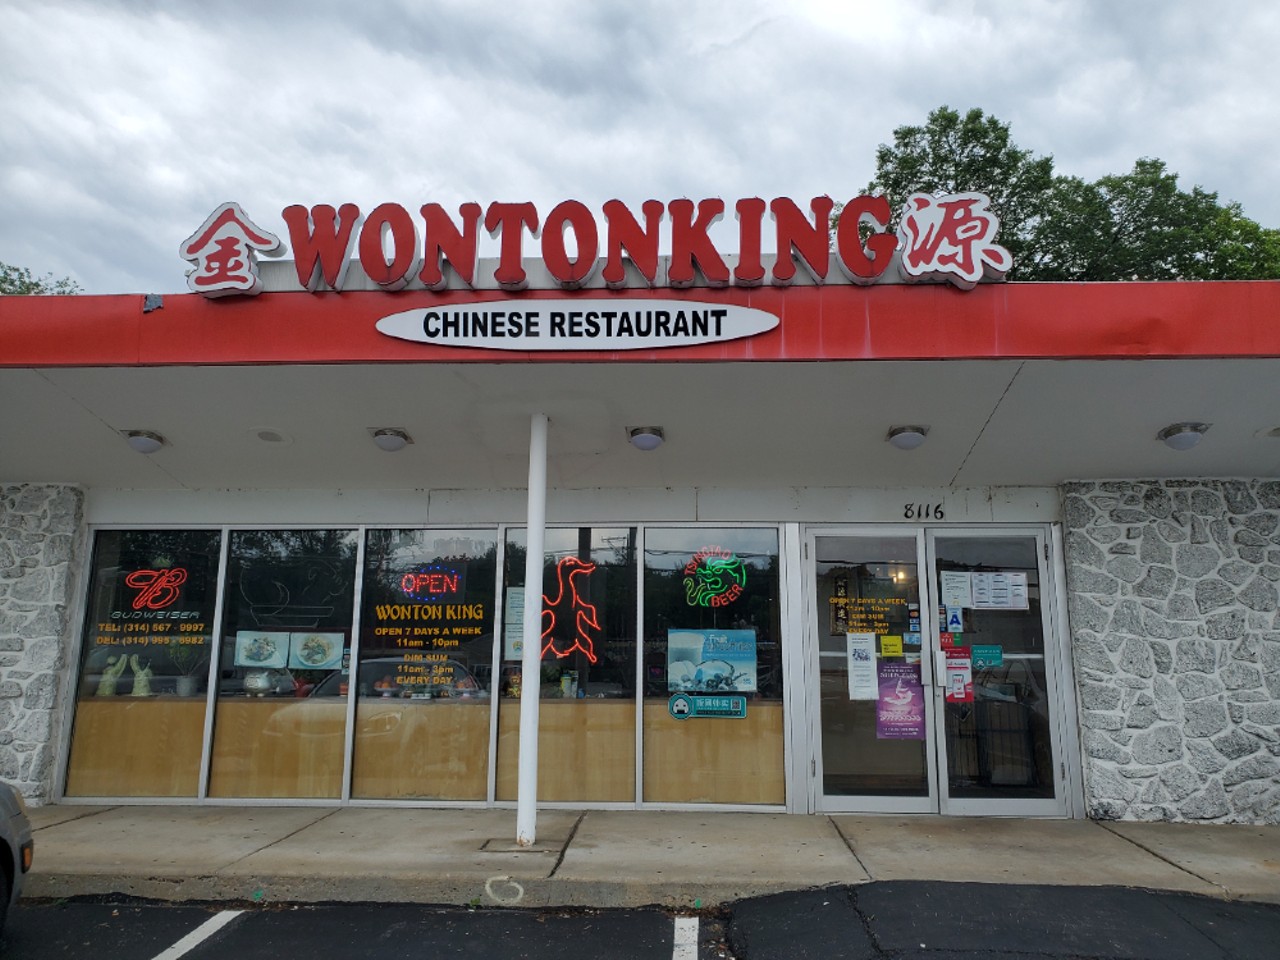 Wonton King
The dim sum spread here is one of the best in town. However, there is so much more to Wonton King (8116 Olive Boulevard, University City; 314-567-9997) than what rolls by the table every Saturday and Sunday.